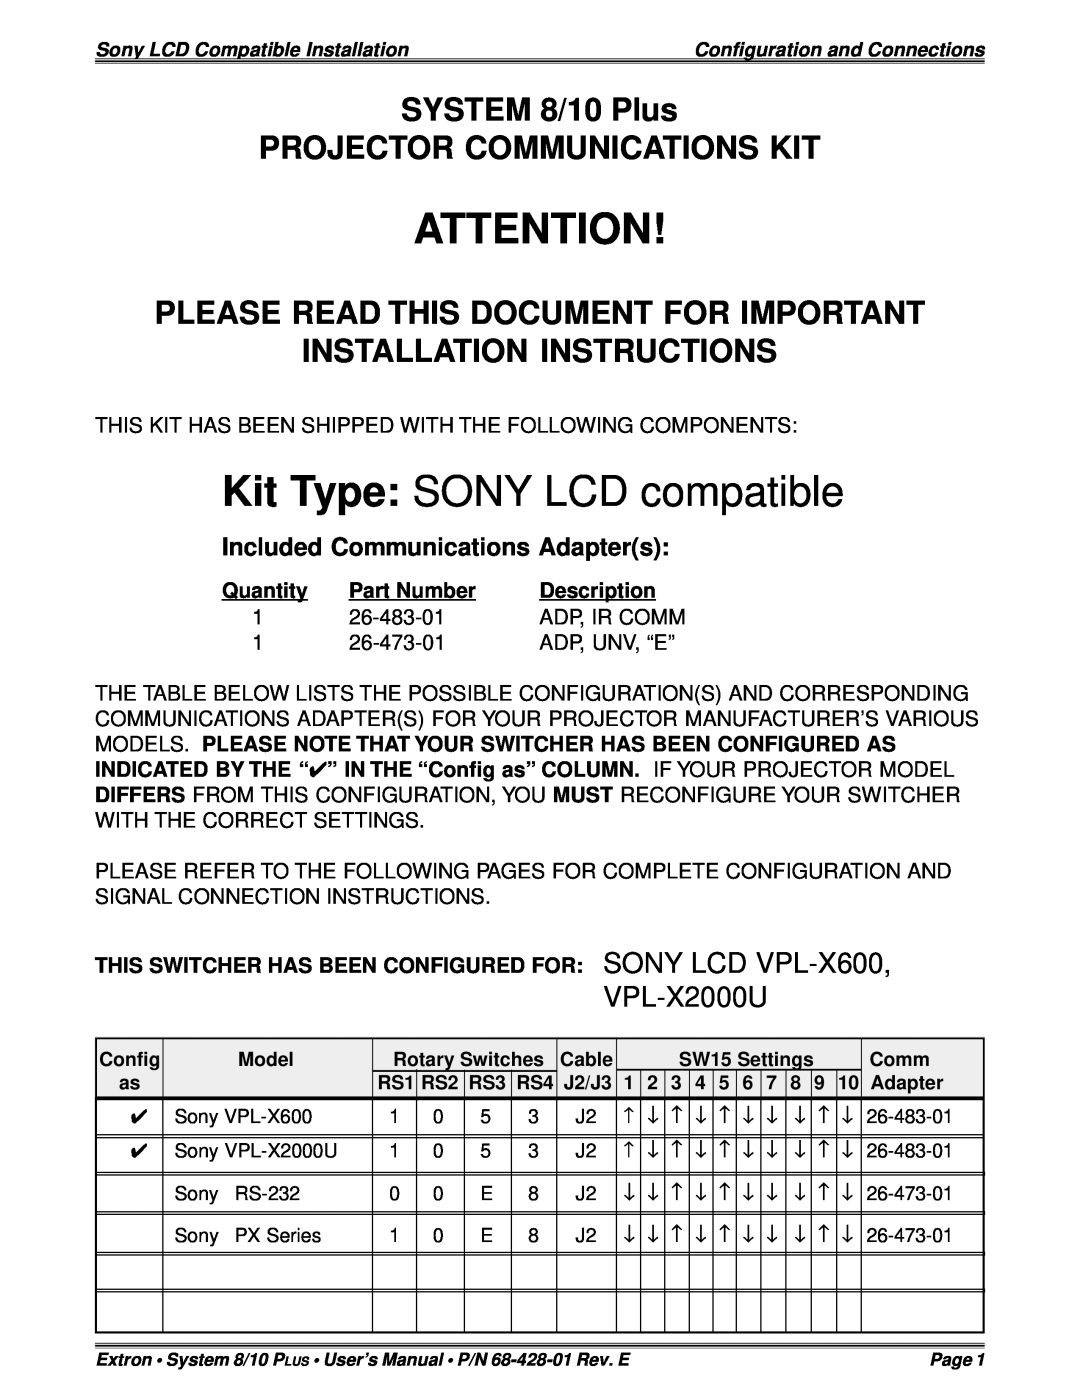 Sony 26-483-01 installation instructions Kit Type SONY LCD compatible, SYSTEM 8/10 Plus PROJECTOR COMMUNICATIONS KIT 